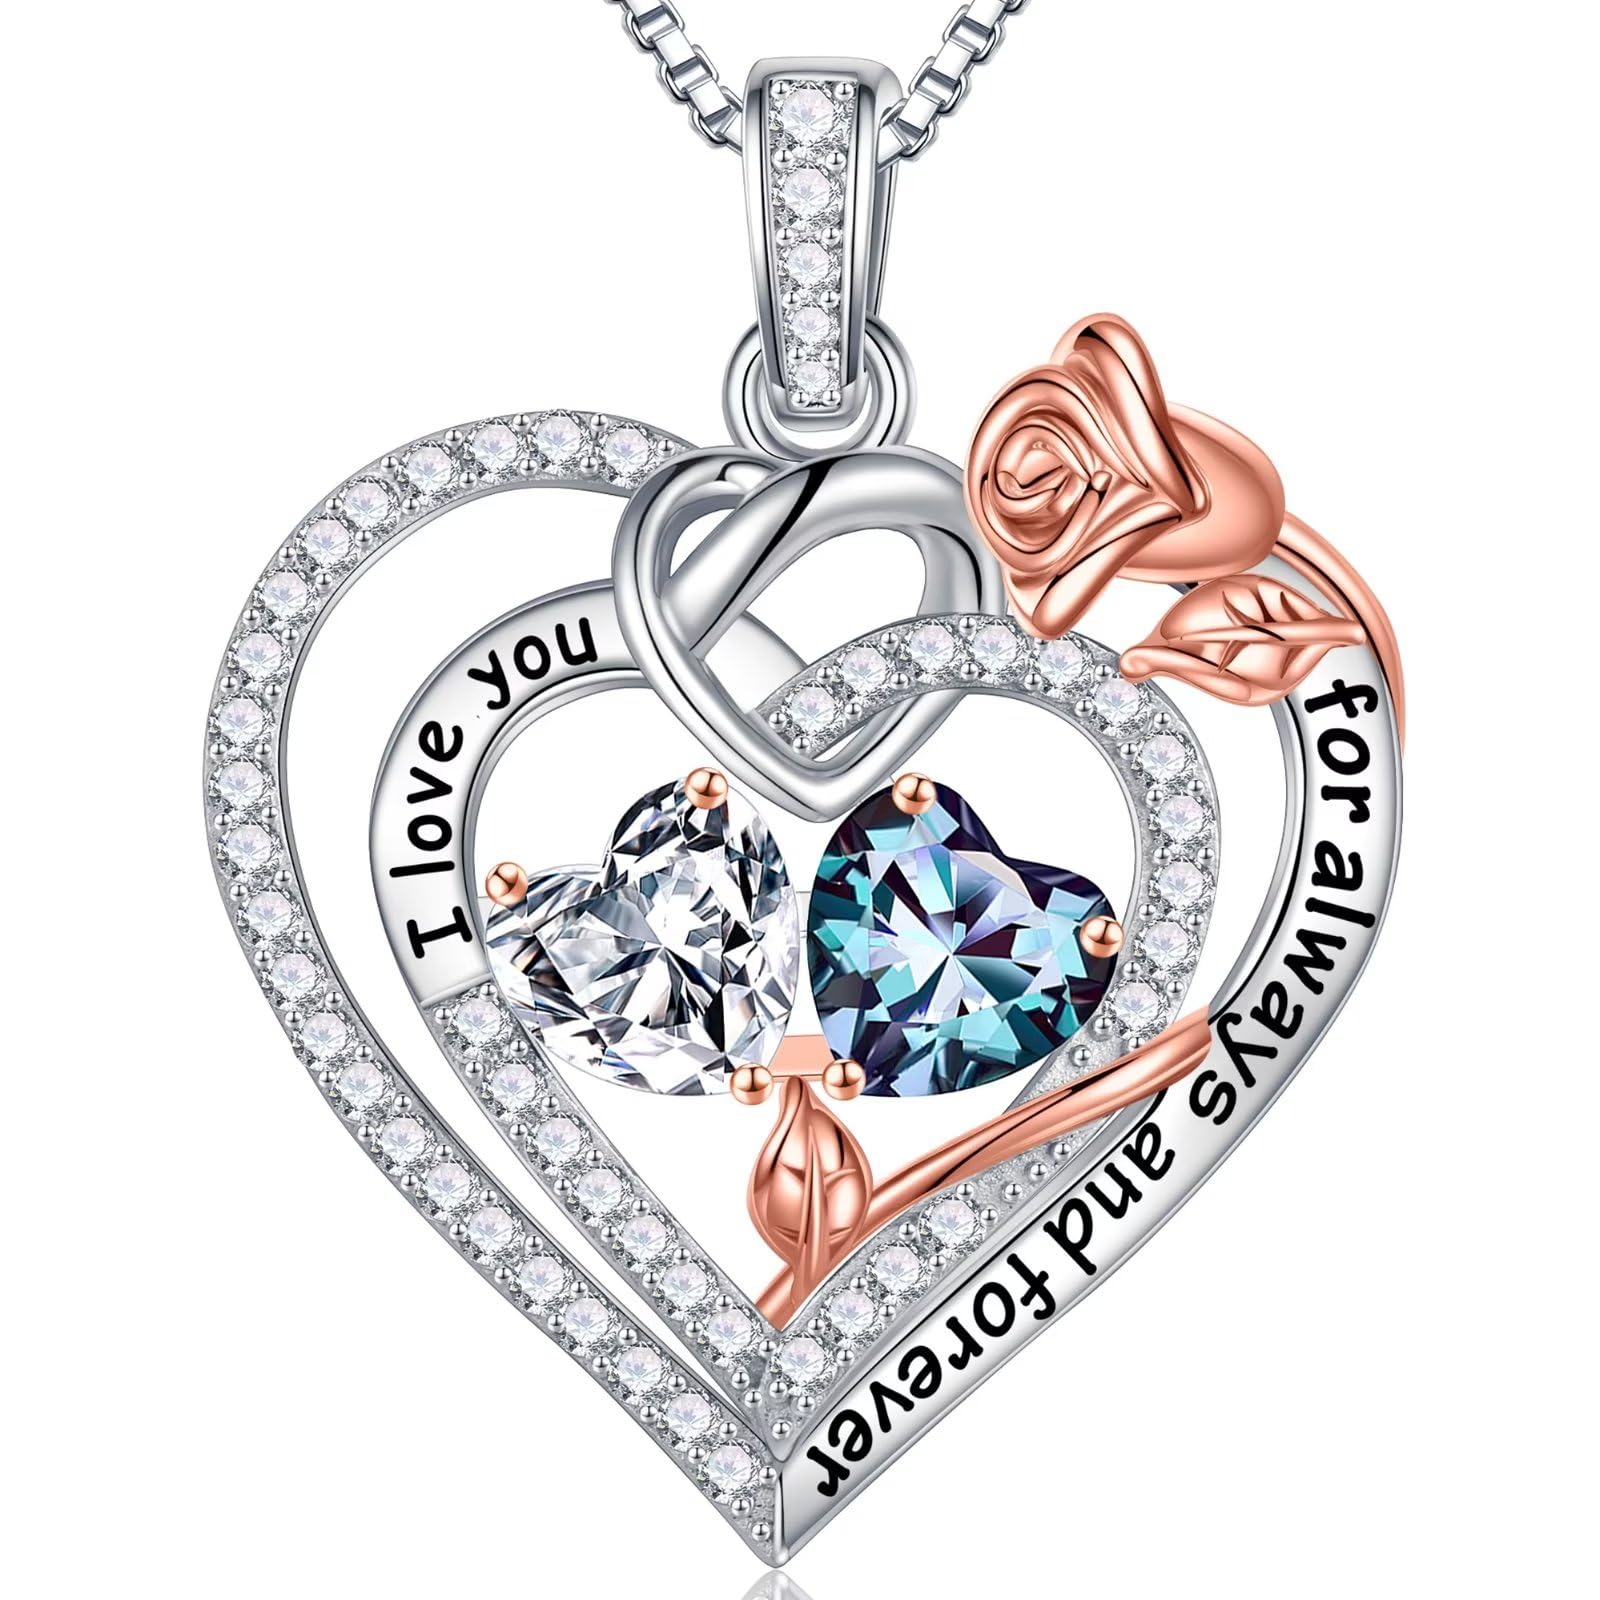 Iefil Rose Heart Birthstone Necklace Gifts for Women, 925 Sterling Silver Birthstone Jewelry Mothers Day Birthday Gifts for Women Anniversary Christmas Gifts for Her Mom Daughter Wife Girlfriend